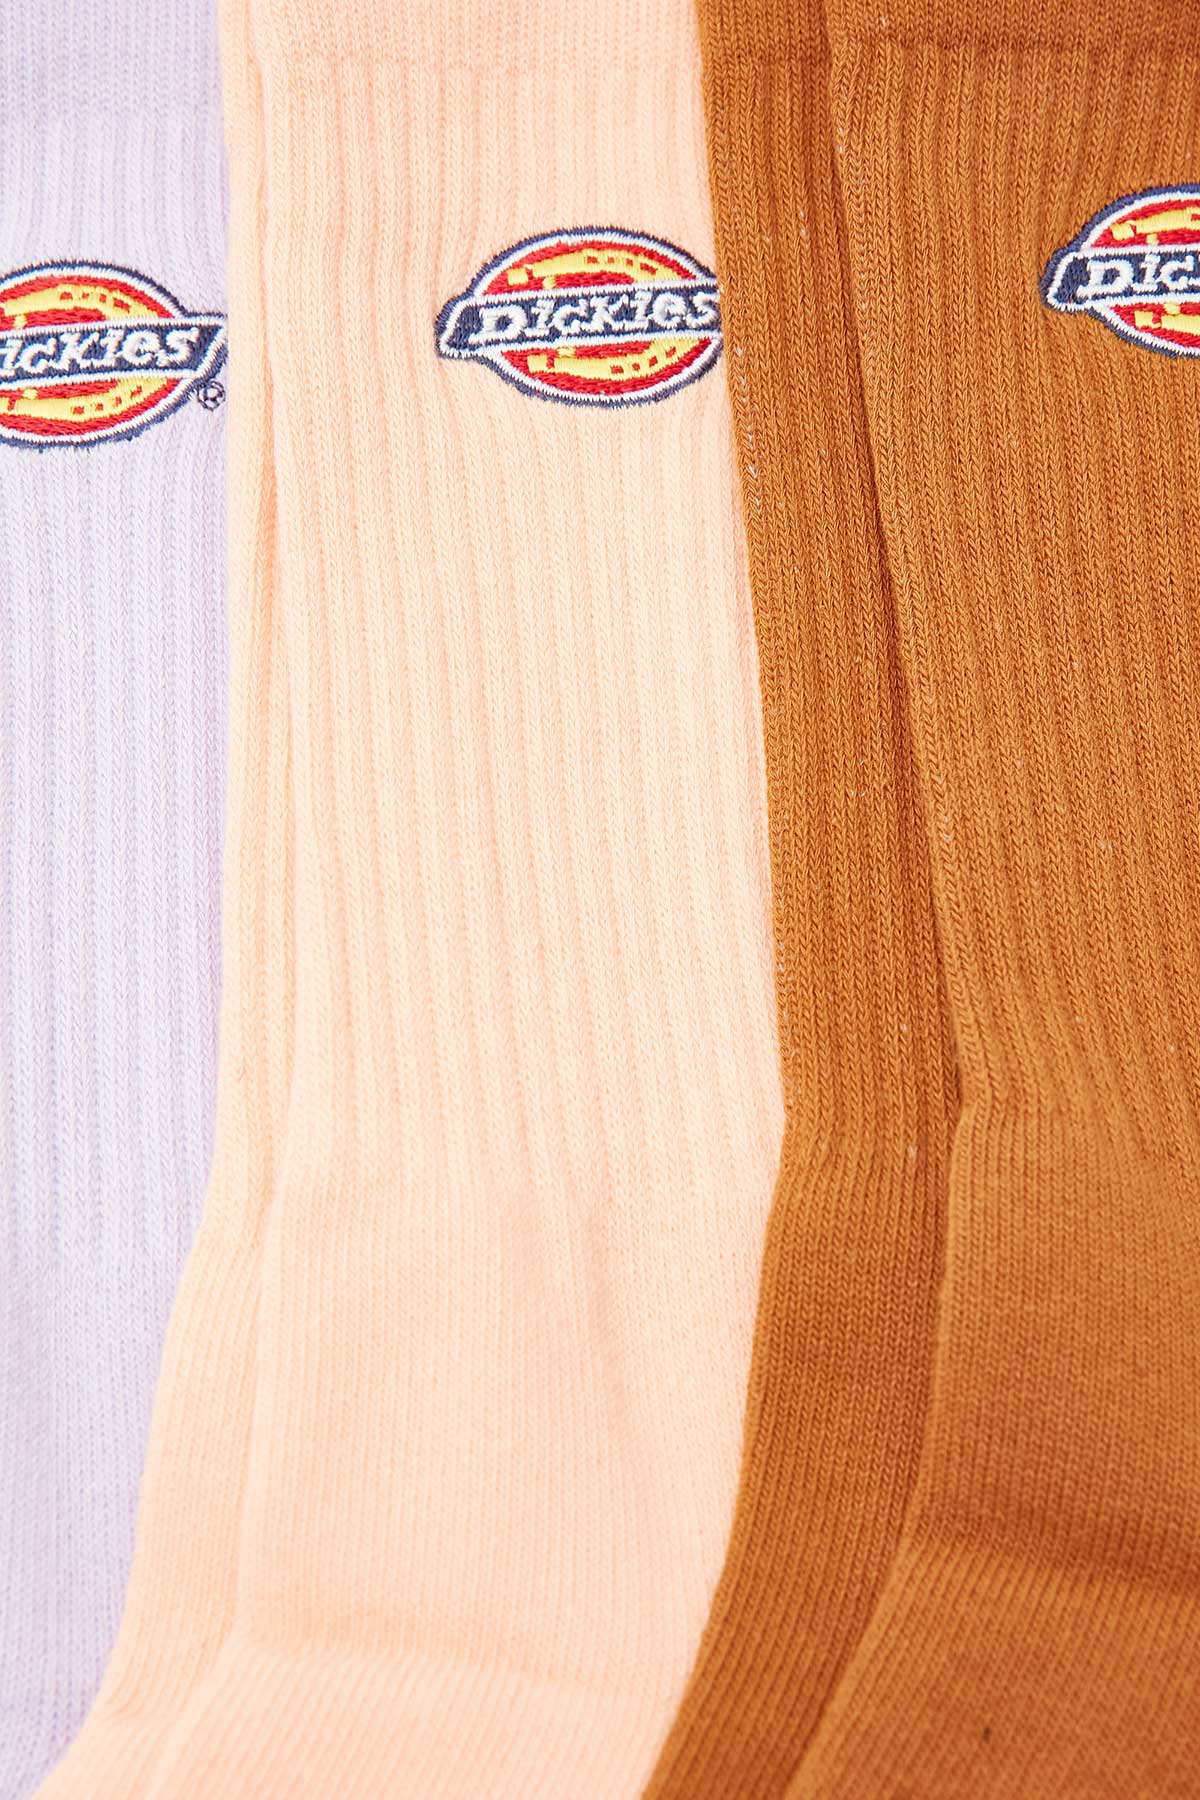 Dickies H.S Rockwood Crew Socks 3 Pack Lilac/Lincoln/Duck